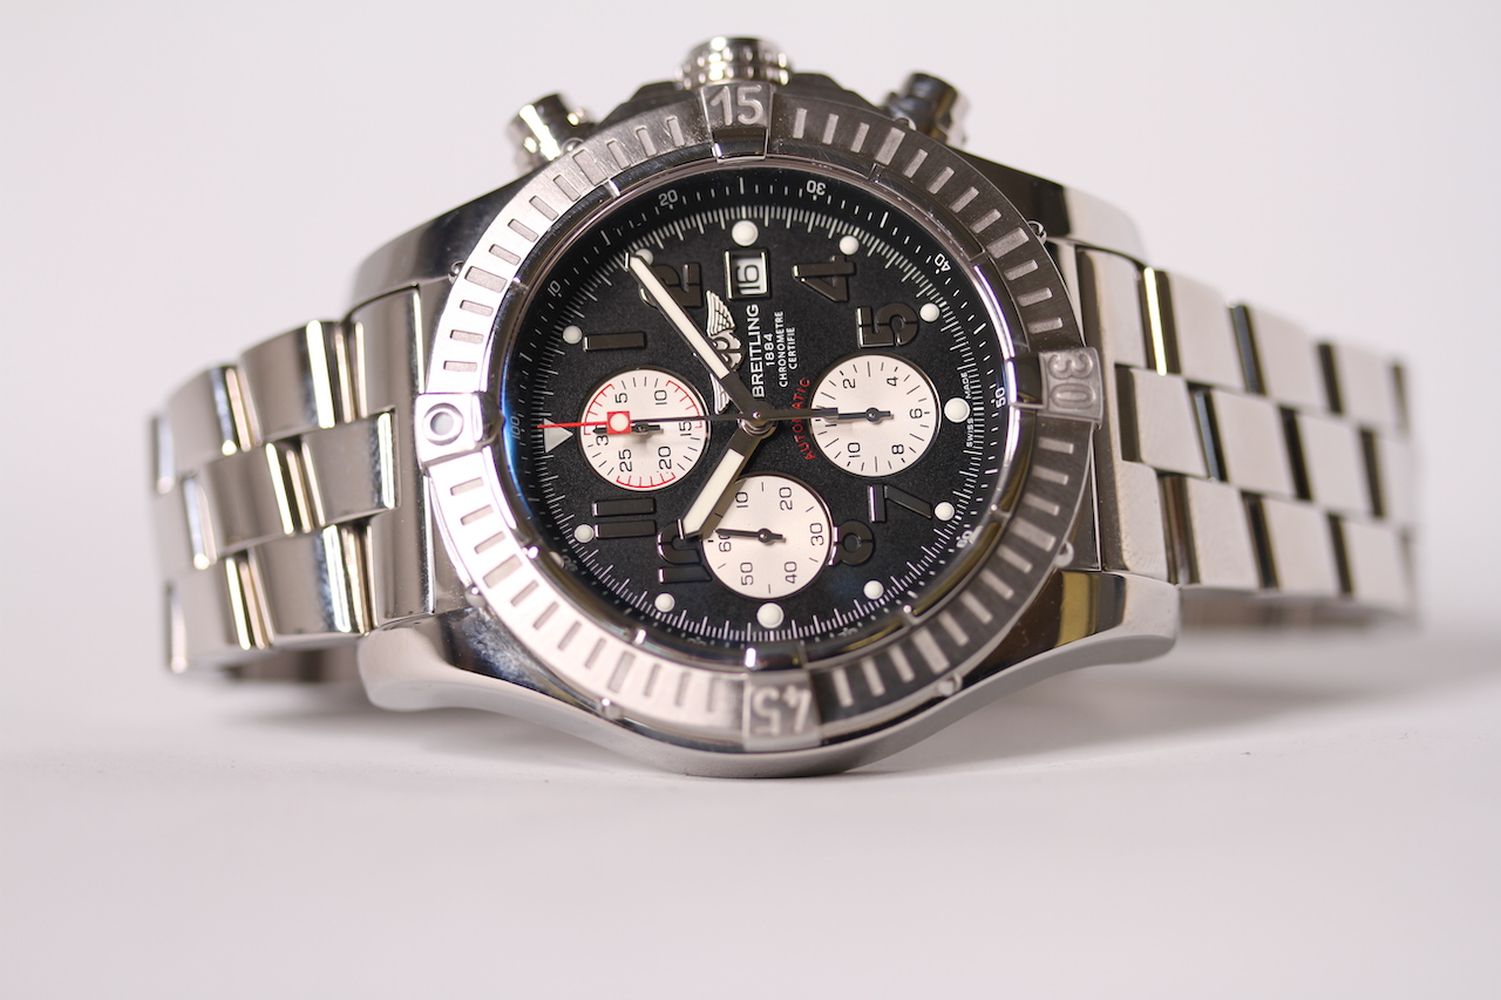 GENTLEMENS BREITLING SUPER AVENGER WRISTWATCH REF A13370 W/BOX & PAPERS, circular black dial with - Image 2 of 5